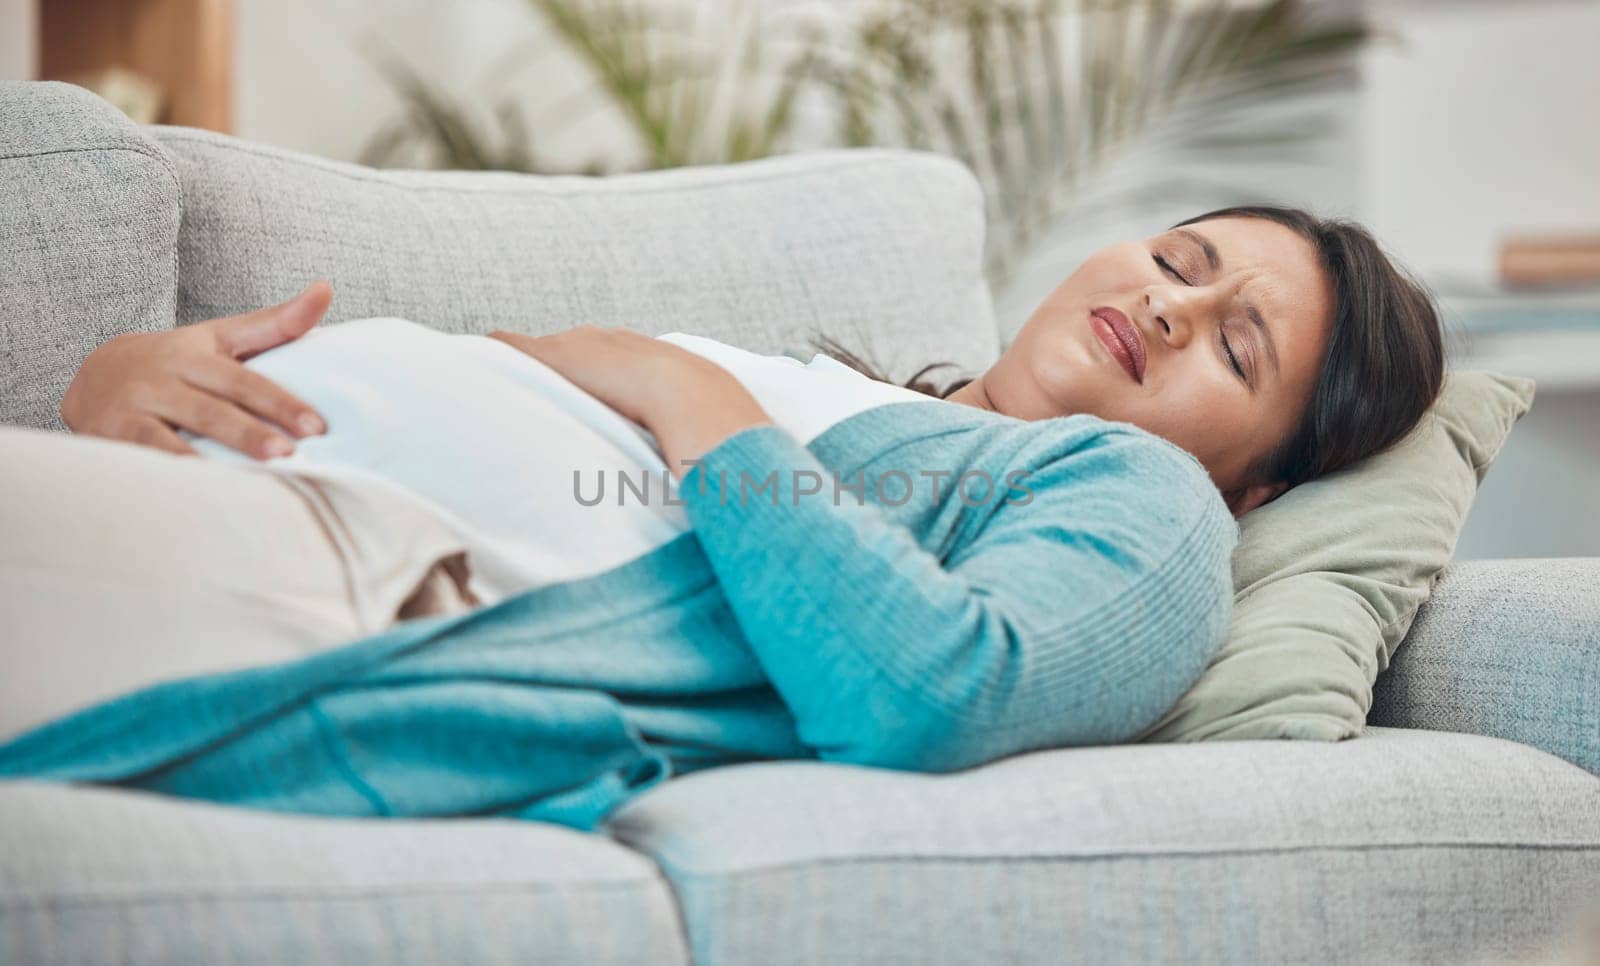 Pregnancy, cramps and woman with stomach pain on sofa holding abdomen in pain, discomfort and physical strain. Healthcare, baby and pregnant woman rest on couch suffering from maternity contractions by YuriArcurs